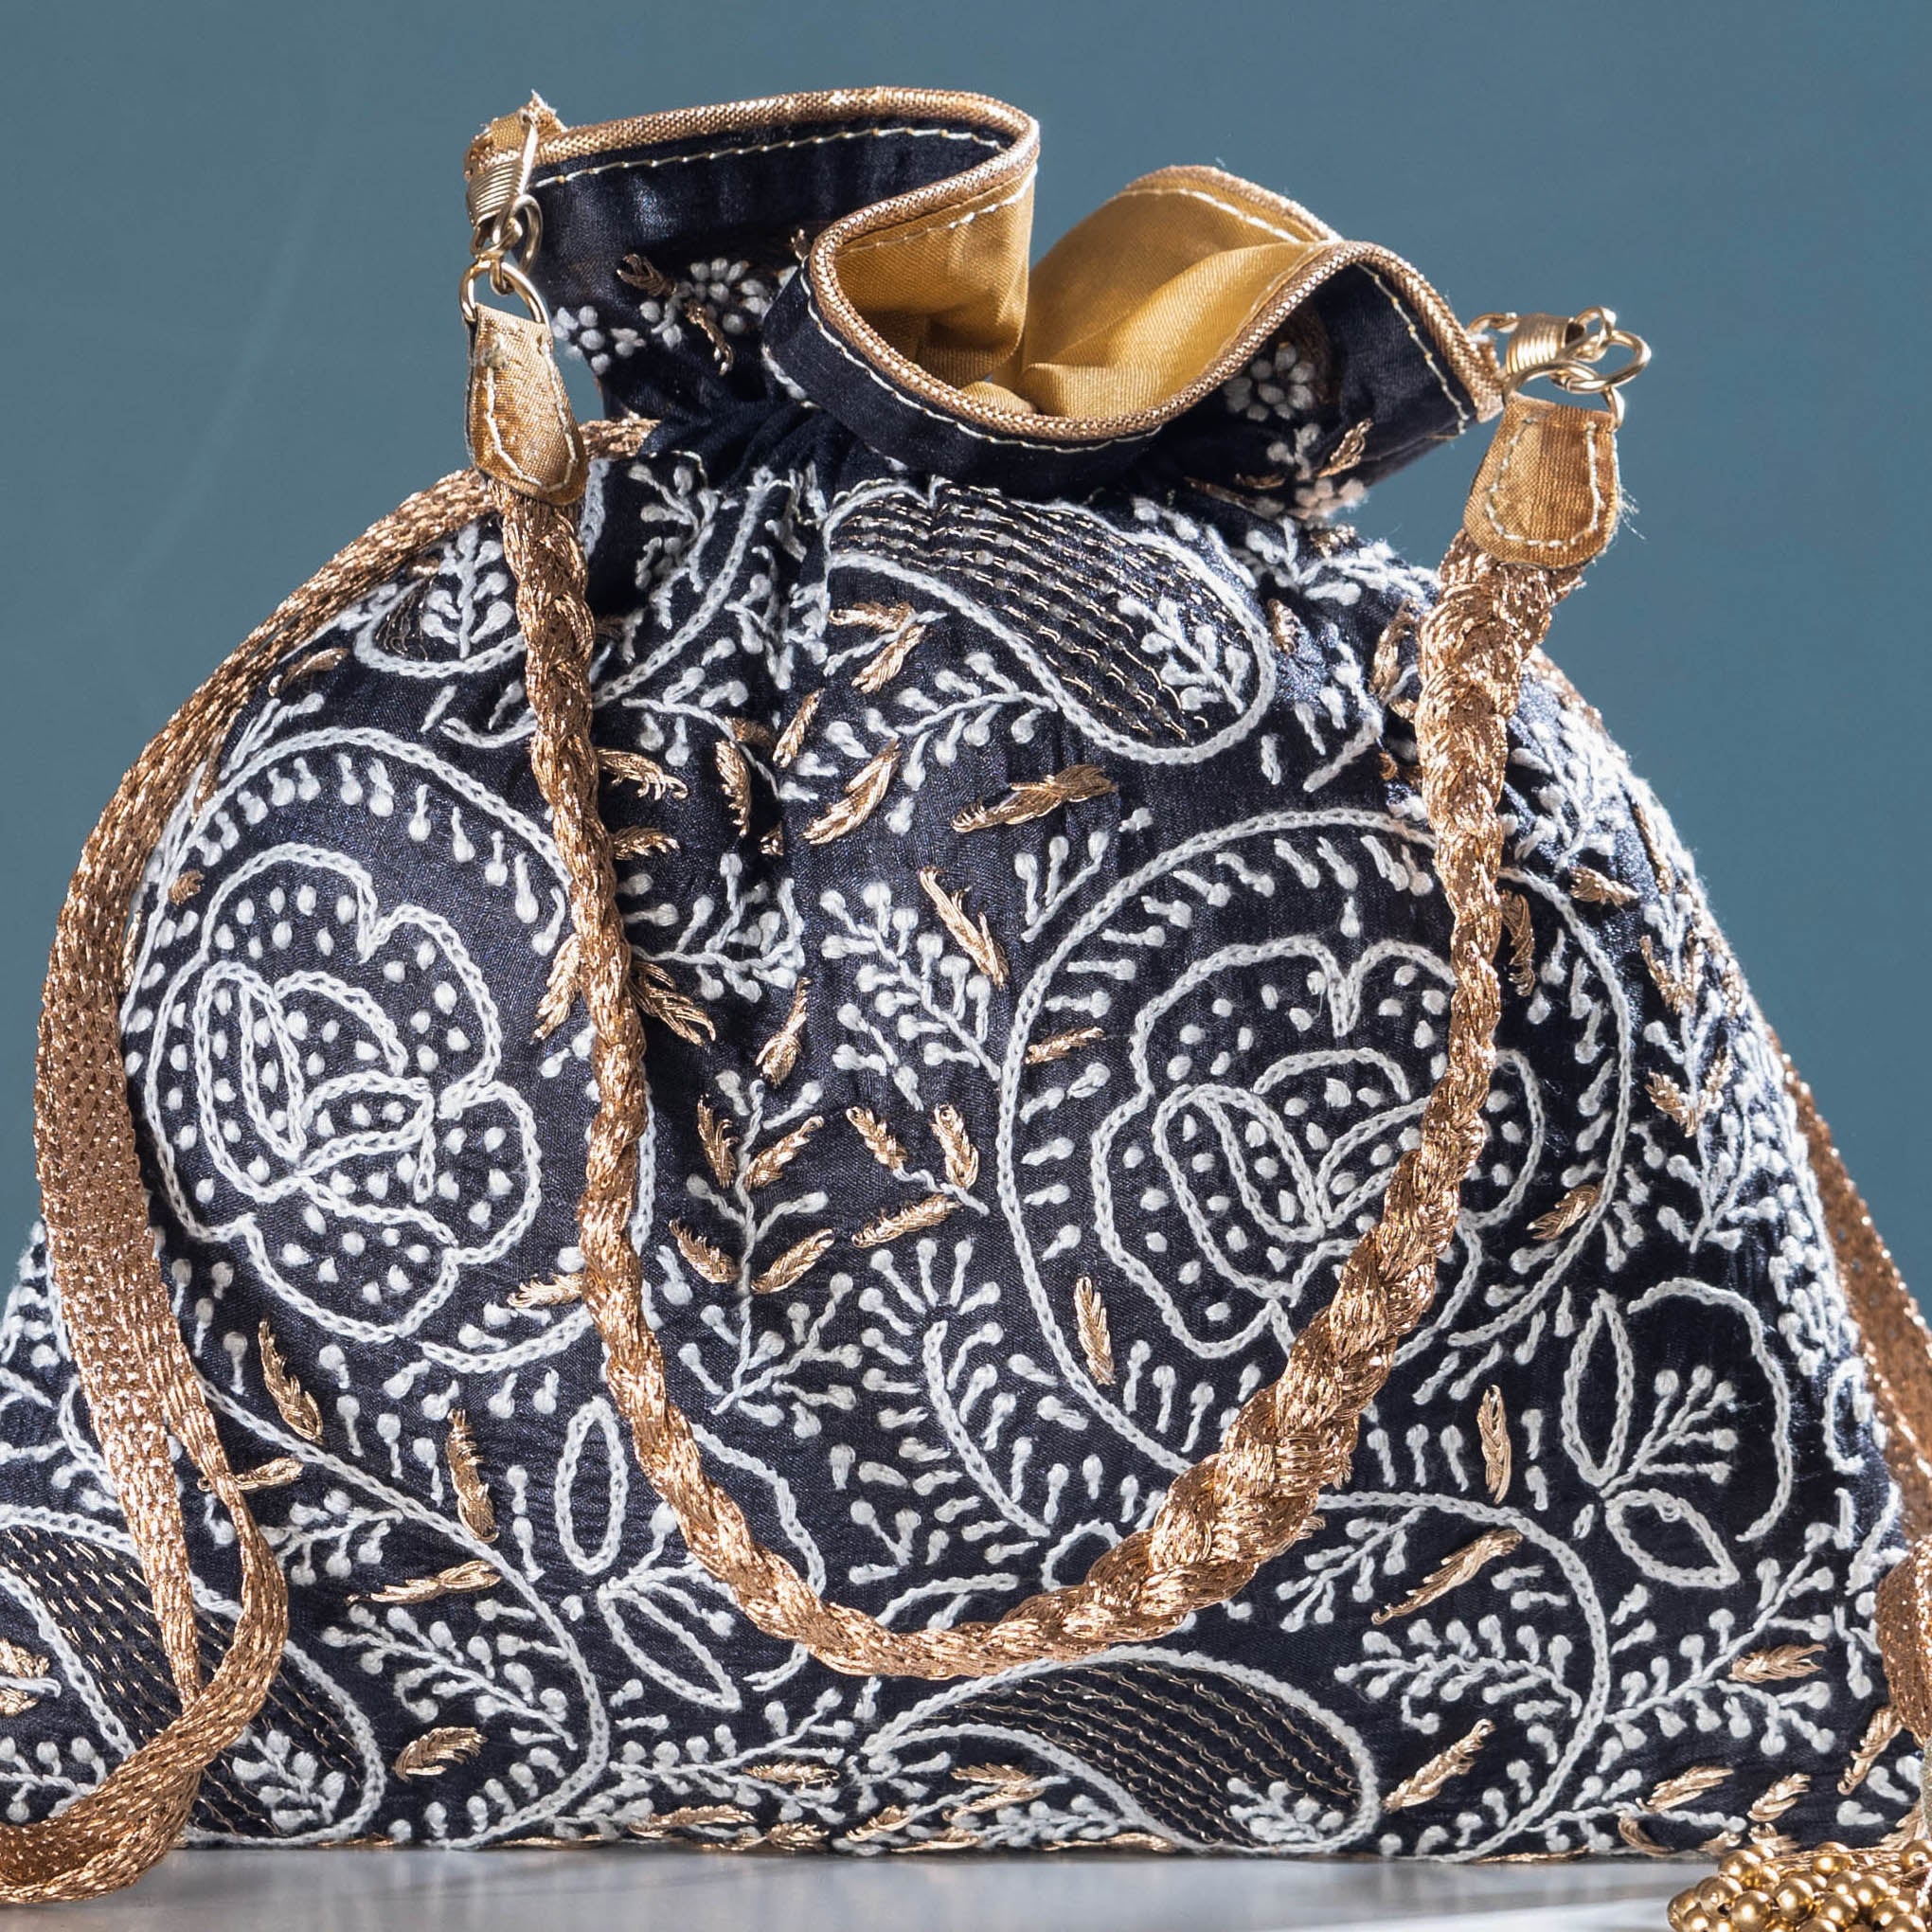 Buy Handcrafted Handmade Embroidered Ethnic bridal Potli Bags Online  Nakh  Clothing